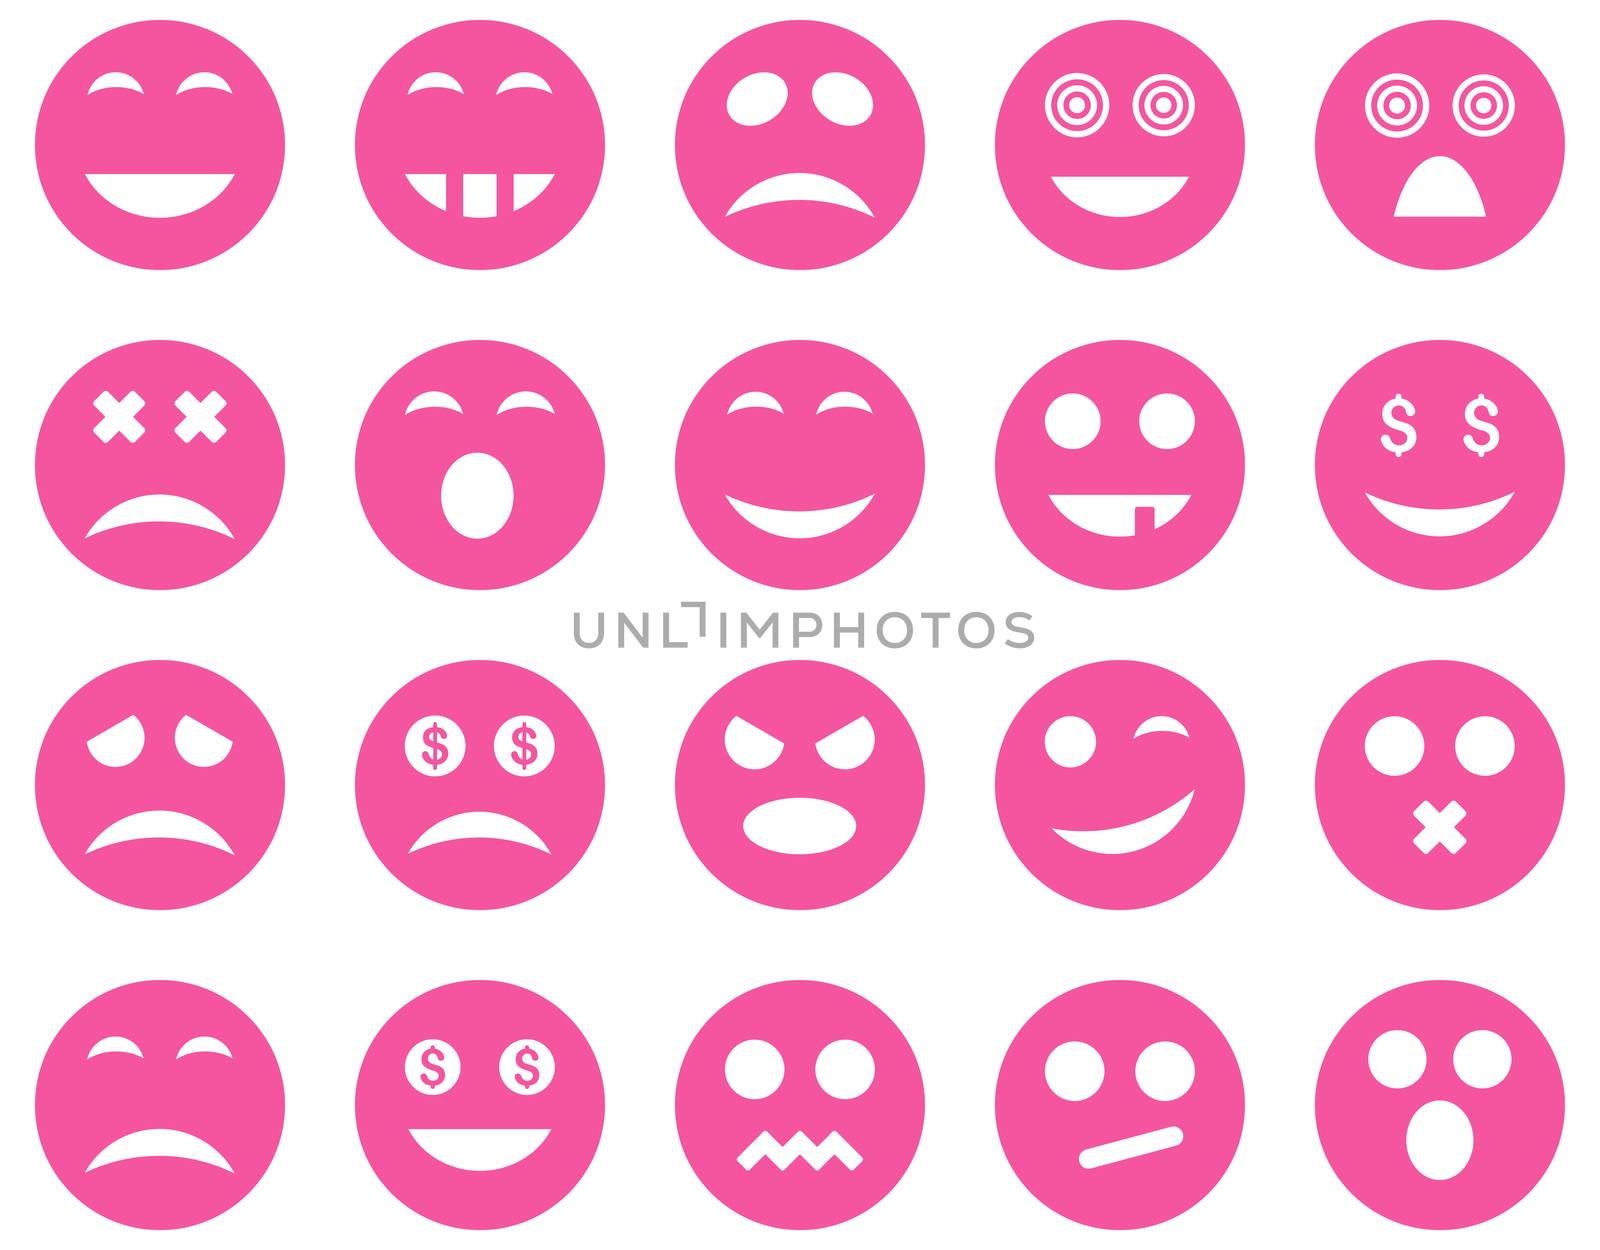 Smile and emotion icons. Glyph set style is flat images, pink symbols, isolated on a white background.